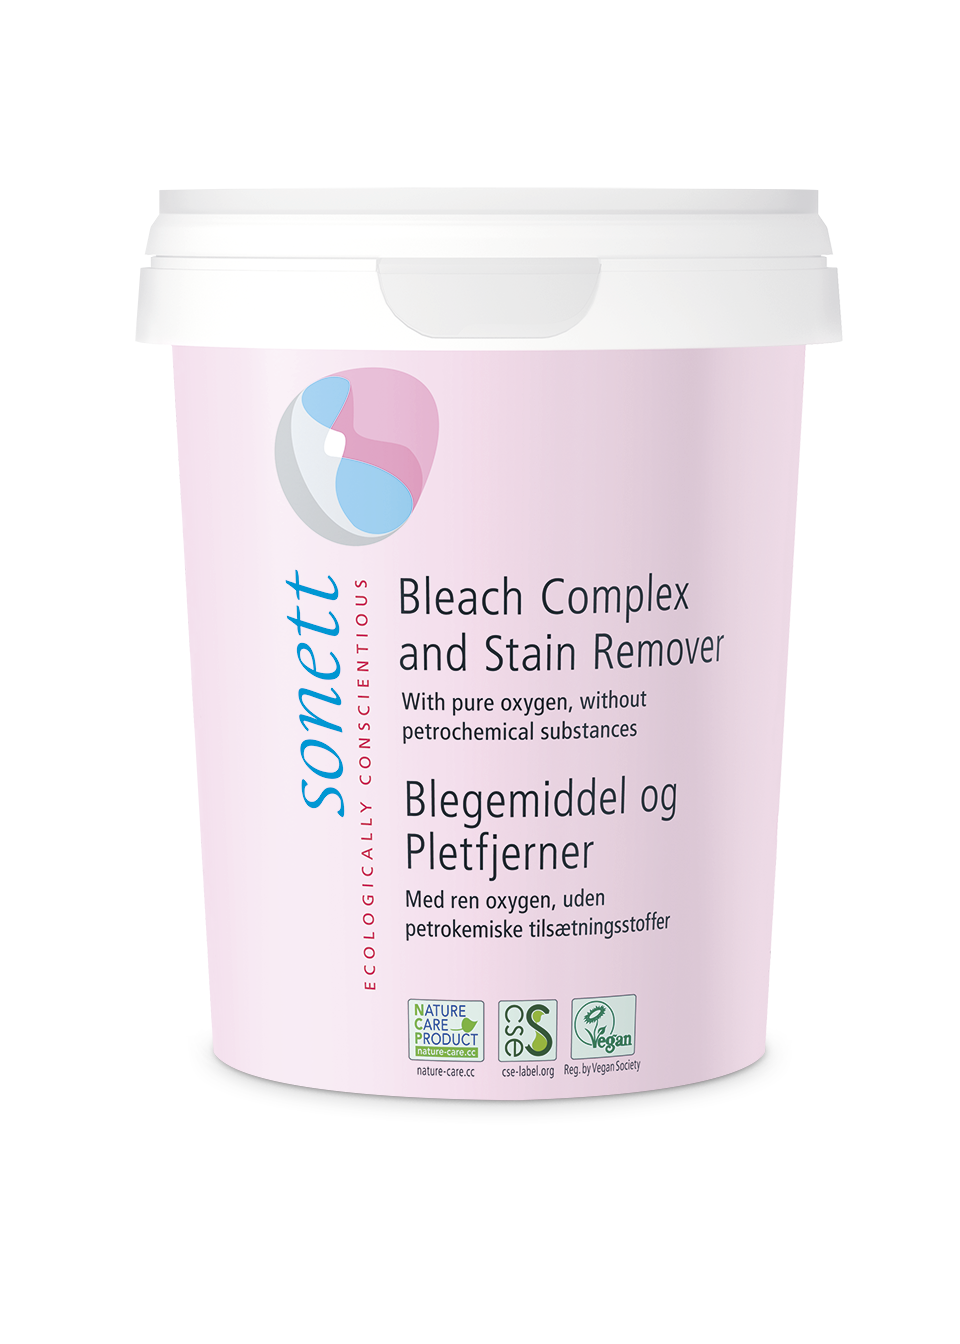 Bleach Stain Removal Guide - Auckland, New Zealand